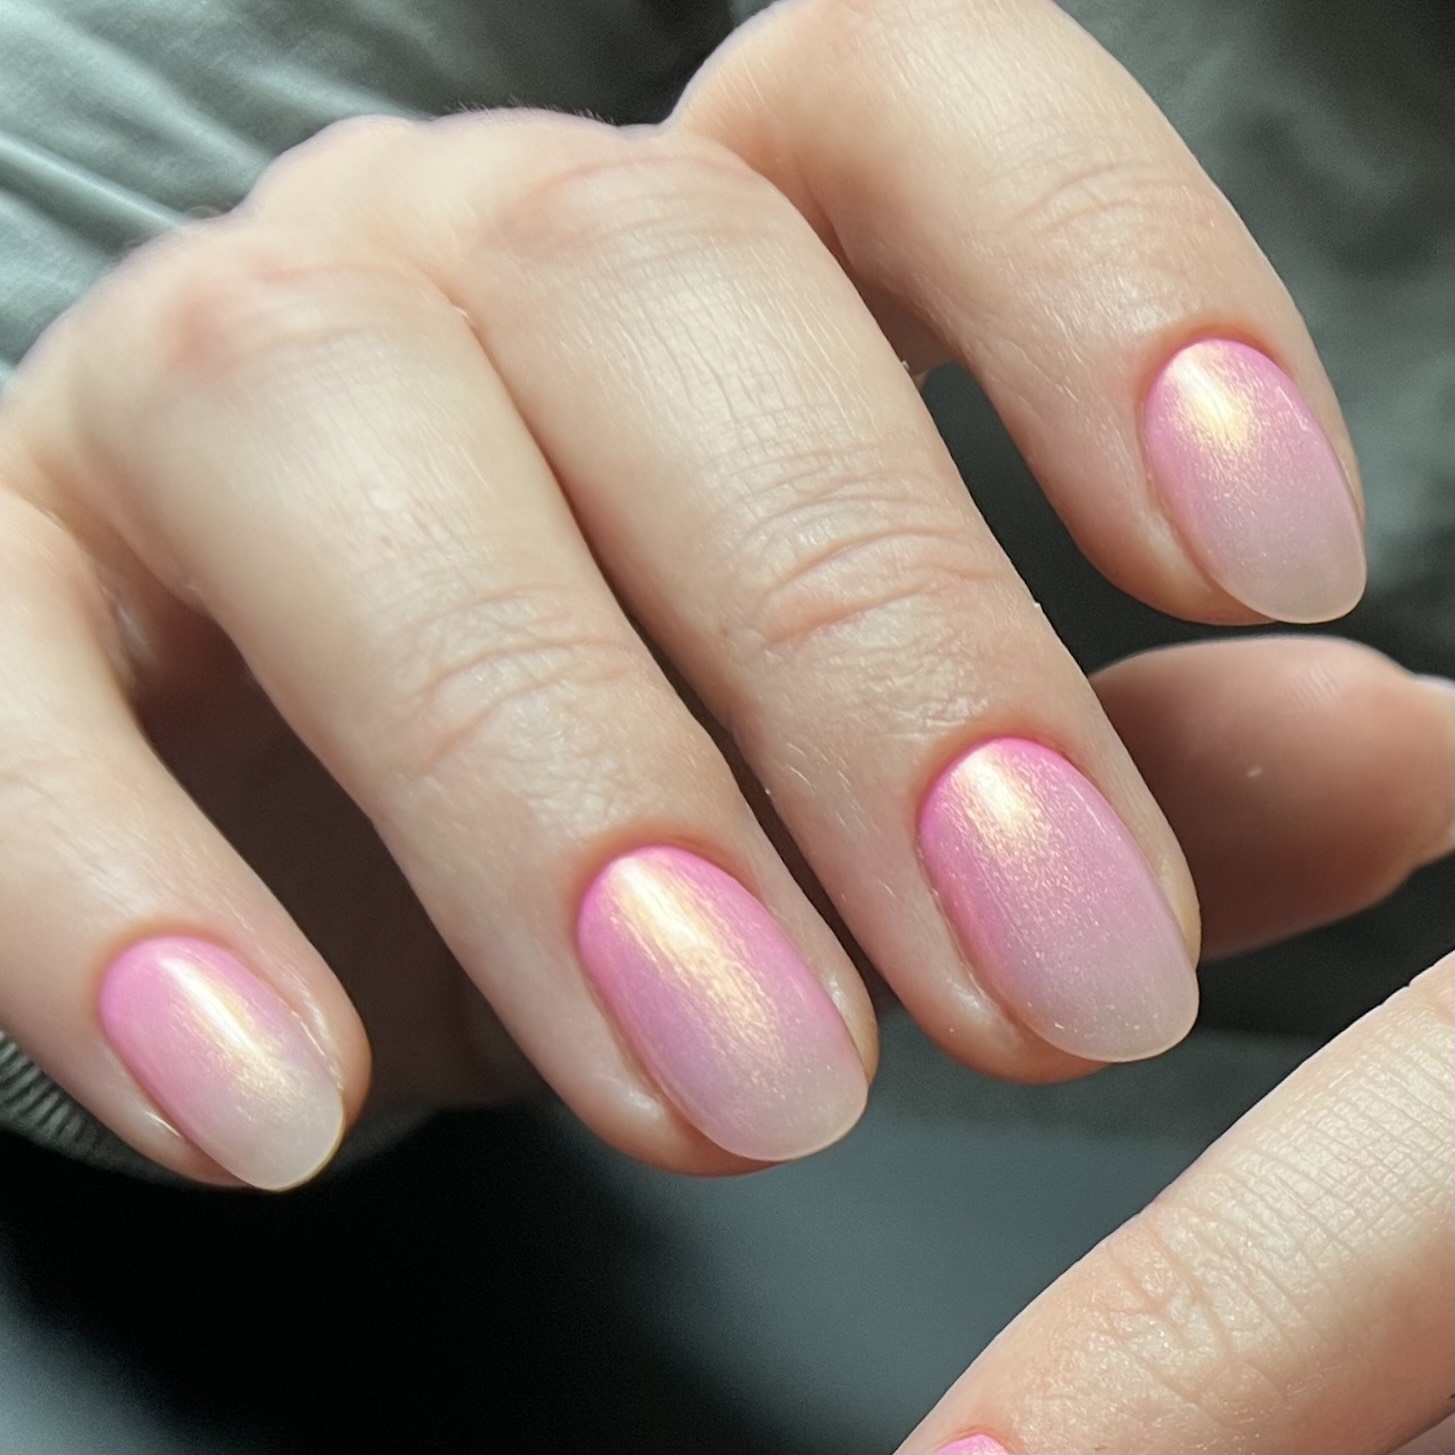 Hand with pink shimmering nail polish on fingernails